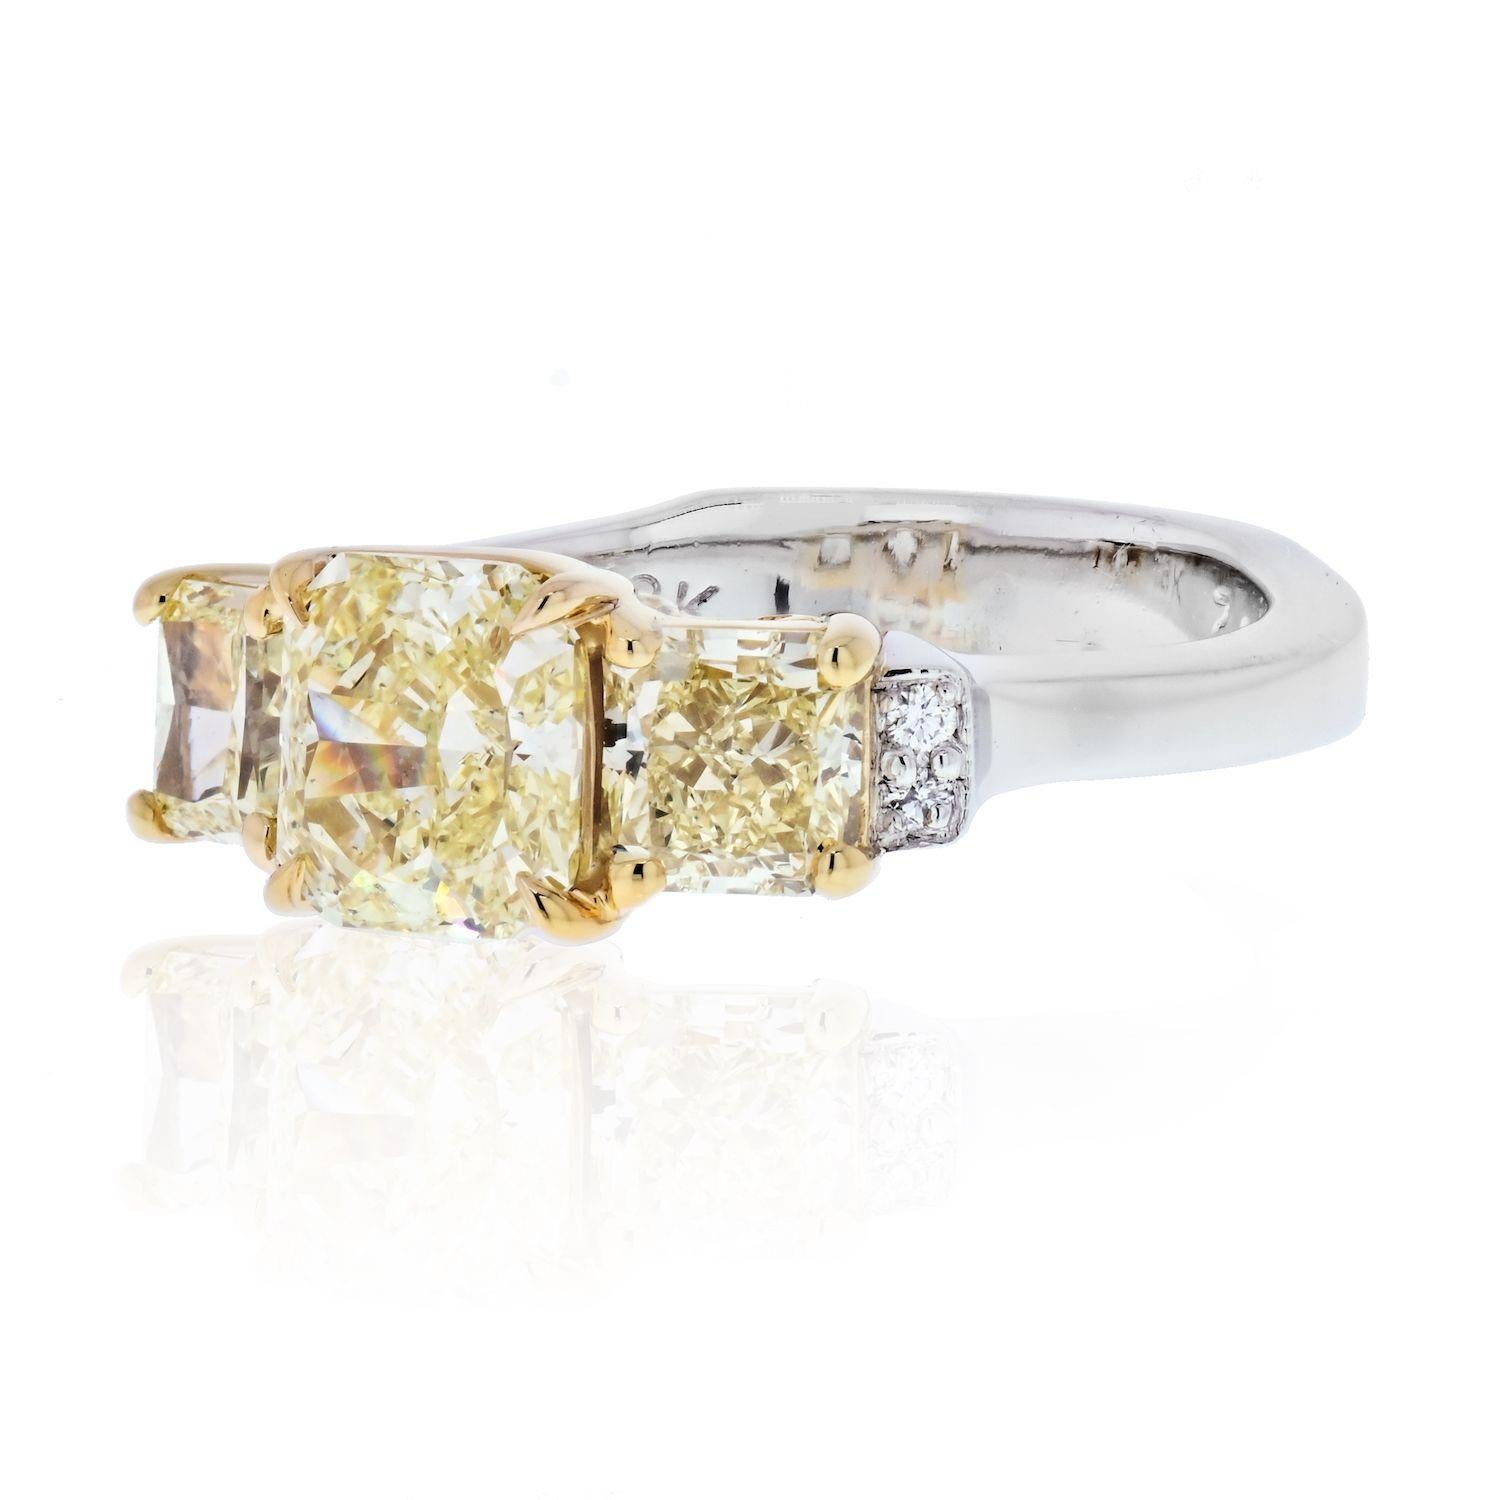 Three stone fancy yellow radiant cut diamond ring crafted in Platinum with 18K yellow gold baskets. Fine ring with GIA certified diamonds.
Center diamond is a 1.14 carat VS2 clarity diamond of natural fancy yellow color. 
Flanked by two matching